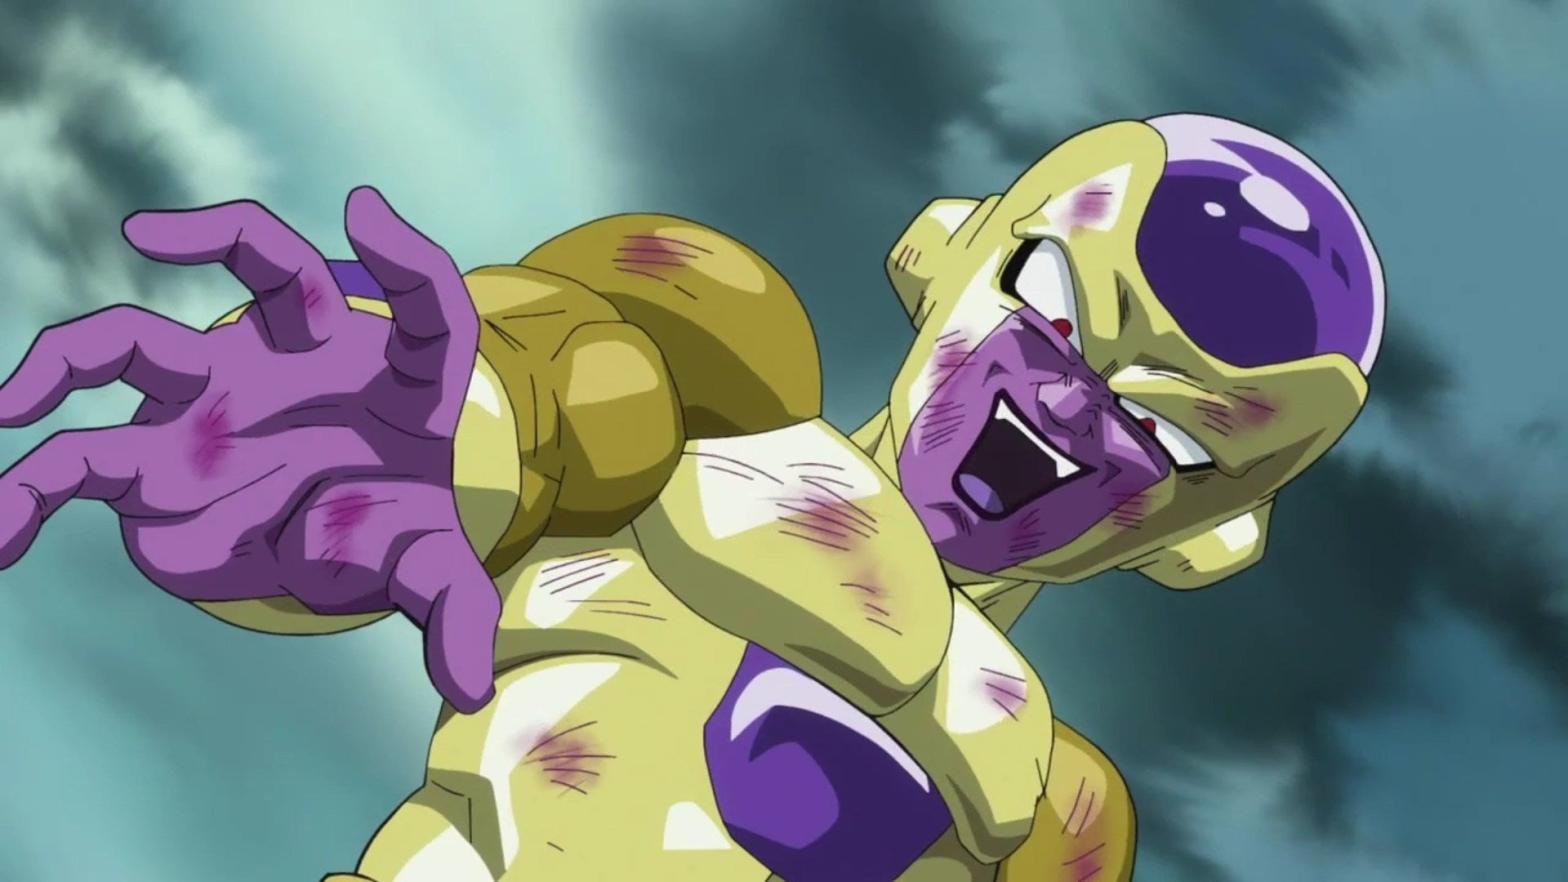 Golden Frieza as seen in Dragon Ball Super. (Image: Toei Animation/Funimation)